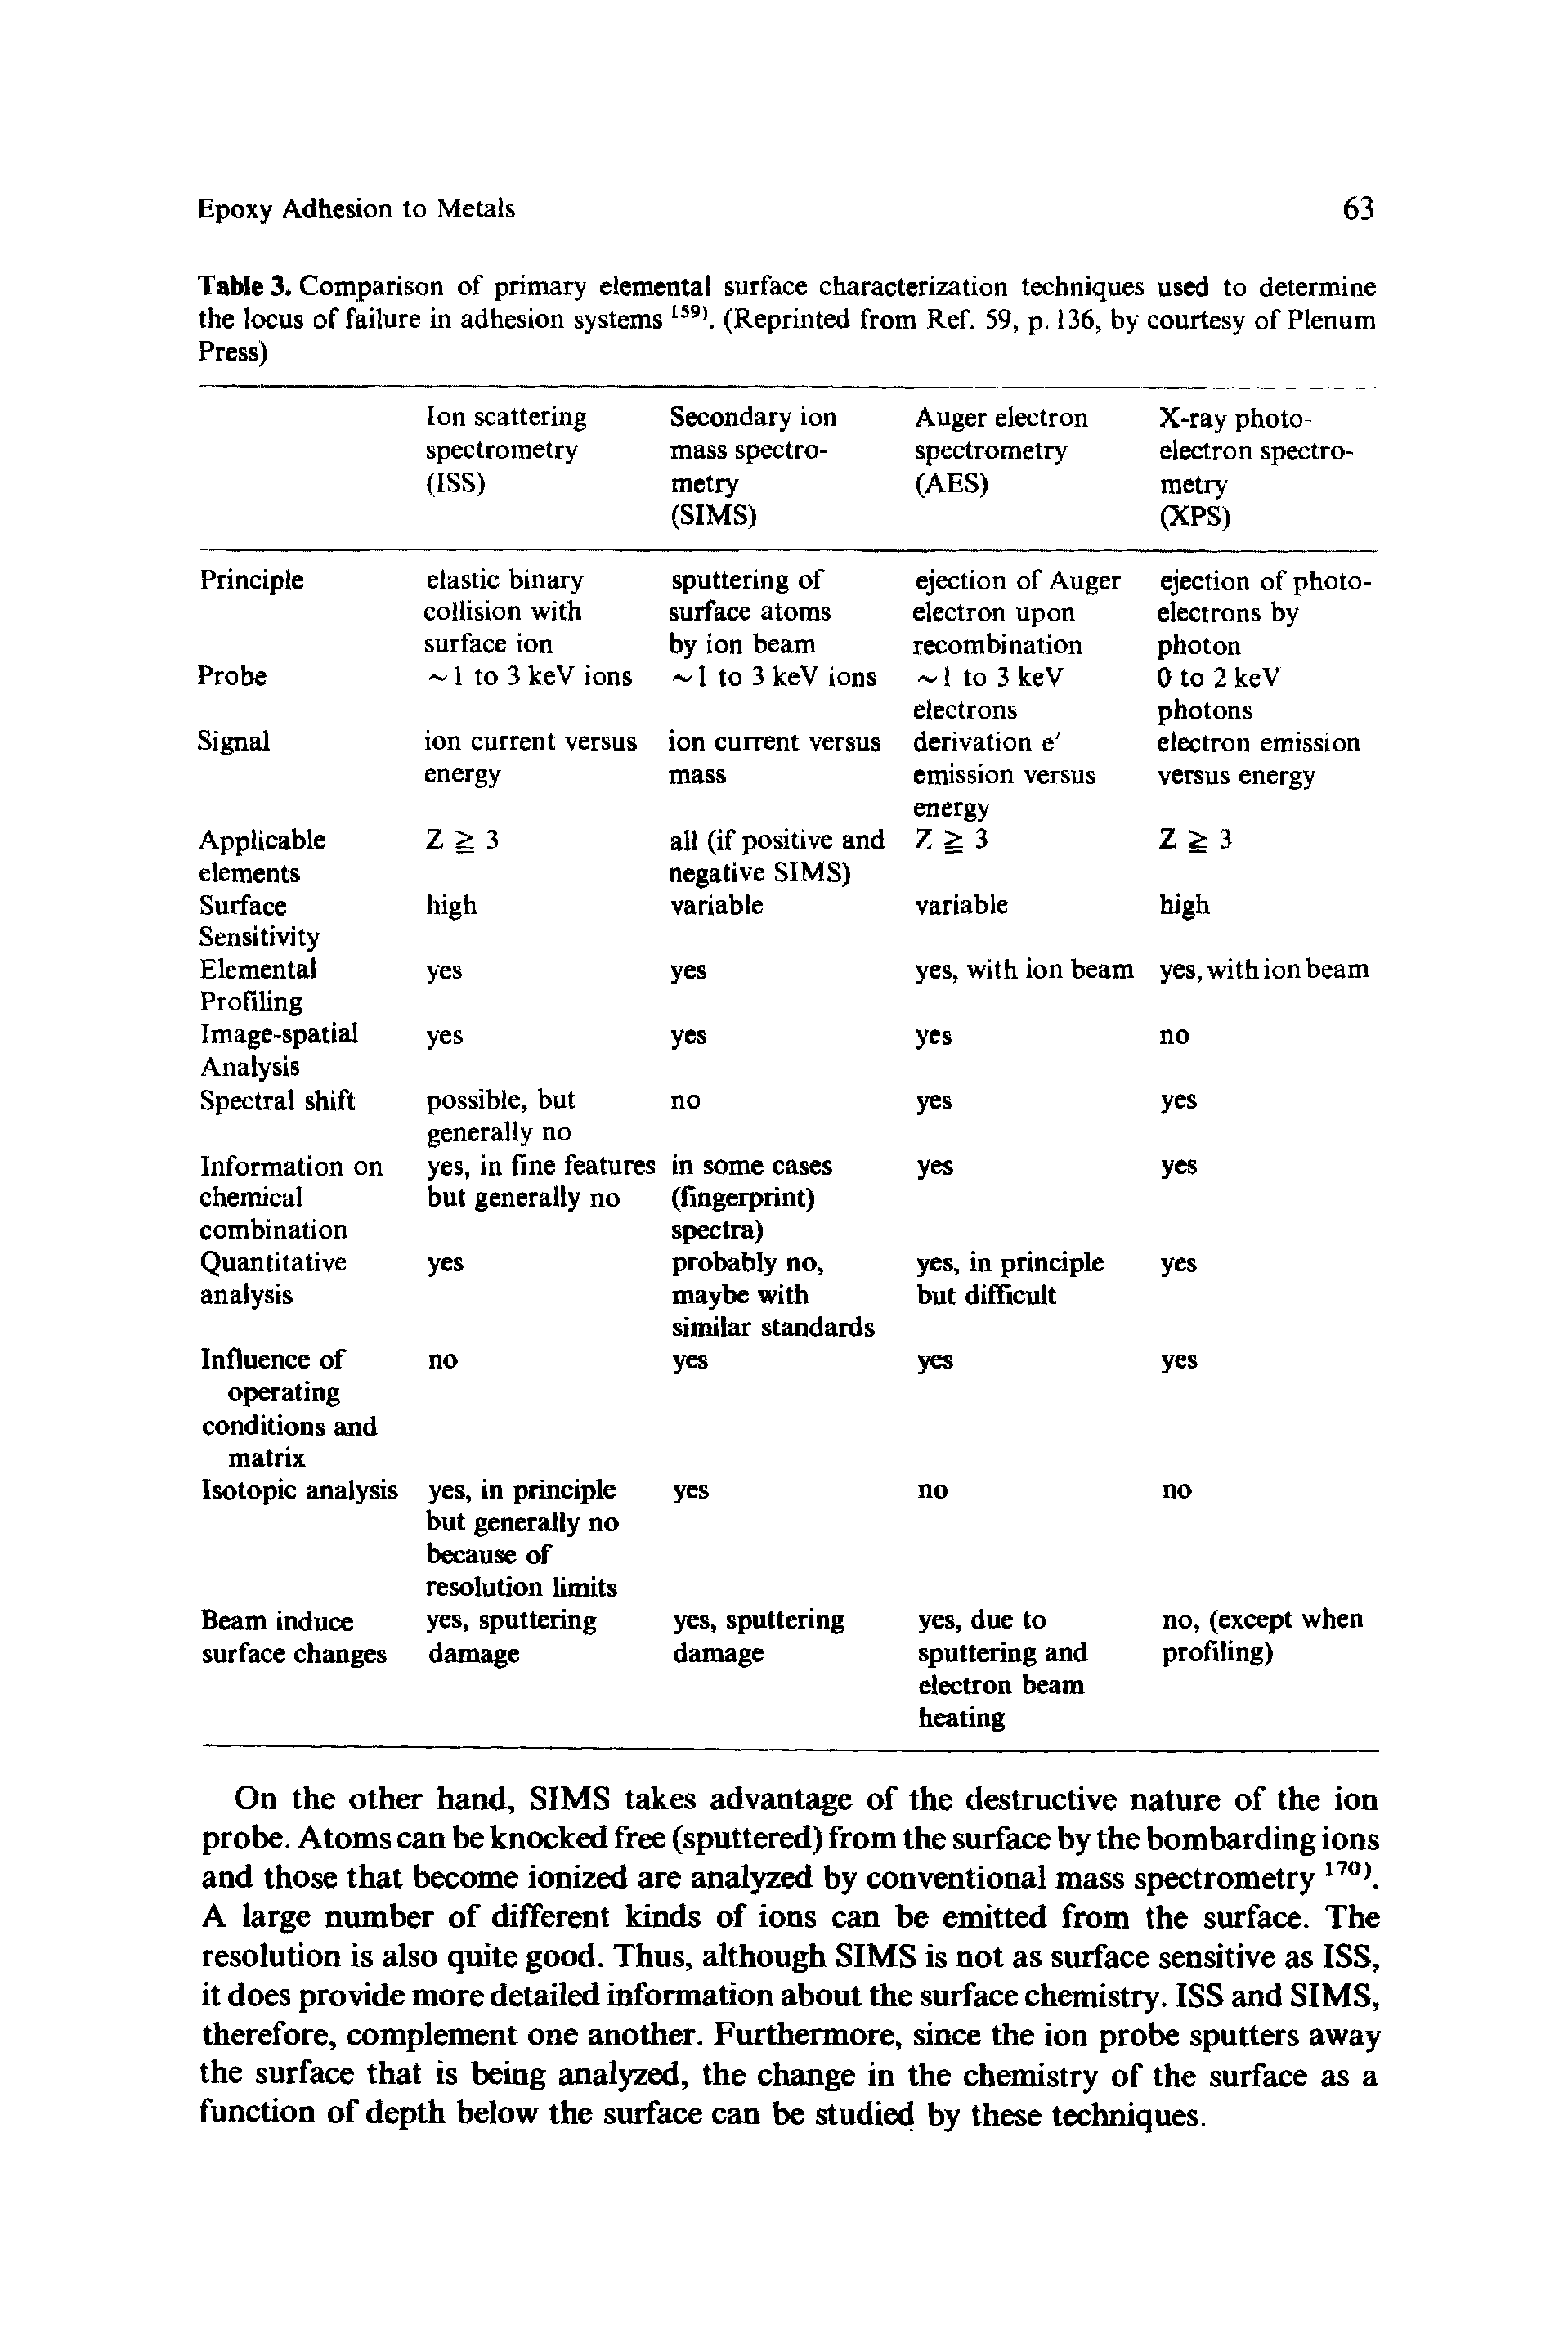 Table 3. Comparison of primary elemental surface characterization techniques used to determine the locus of failure in adhesion systems 159). (Reprinted from Ref. 59, p. 136, by courtesy of Plenum Press)...